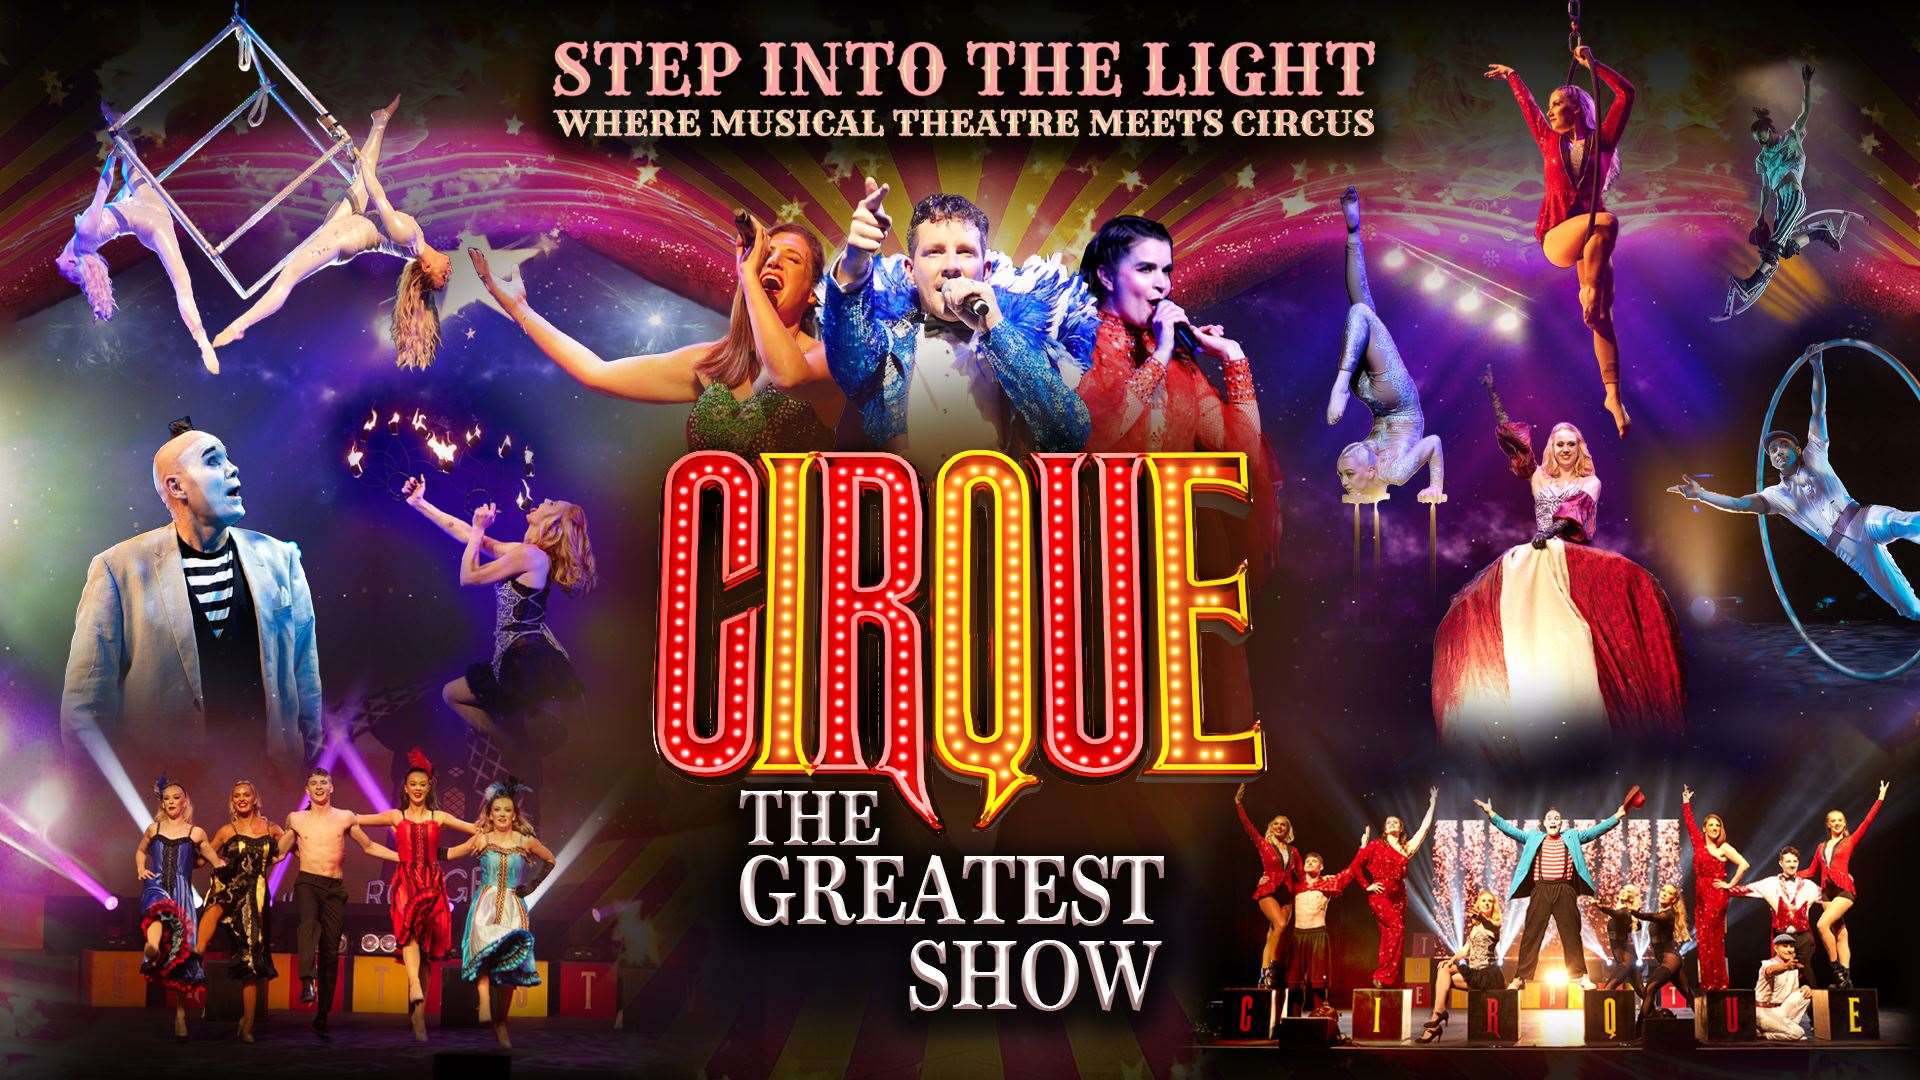 A musical theatre circus spectacular, Cirque: The Greatest Show will roll up to the P&J Live next spring.